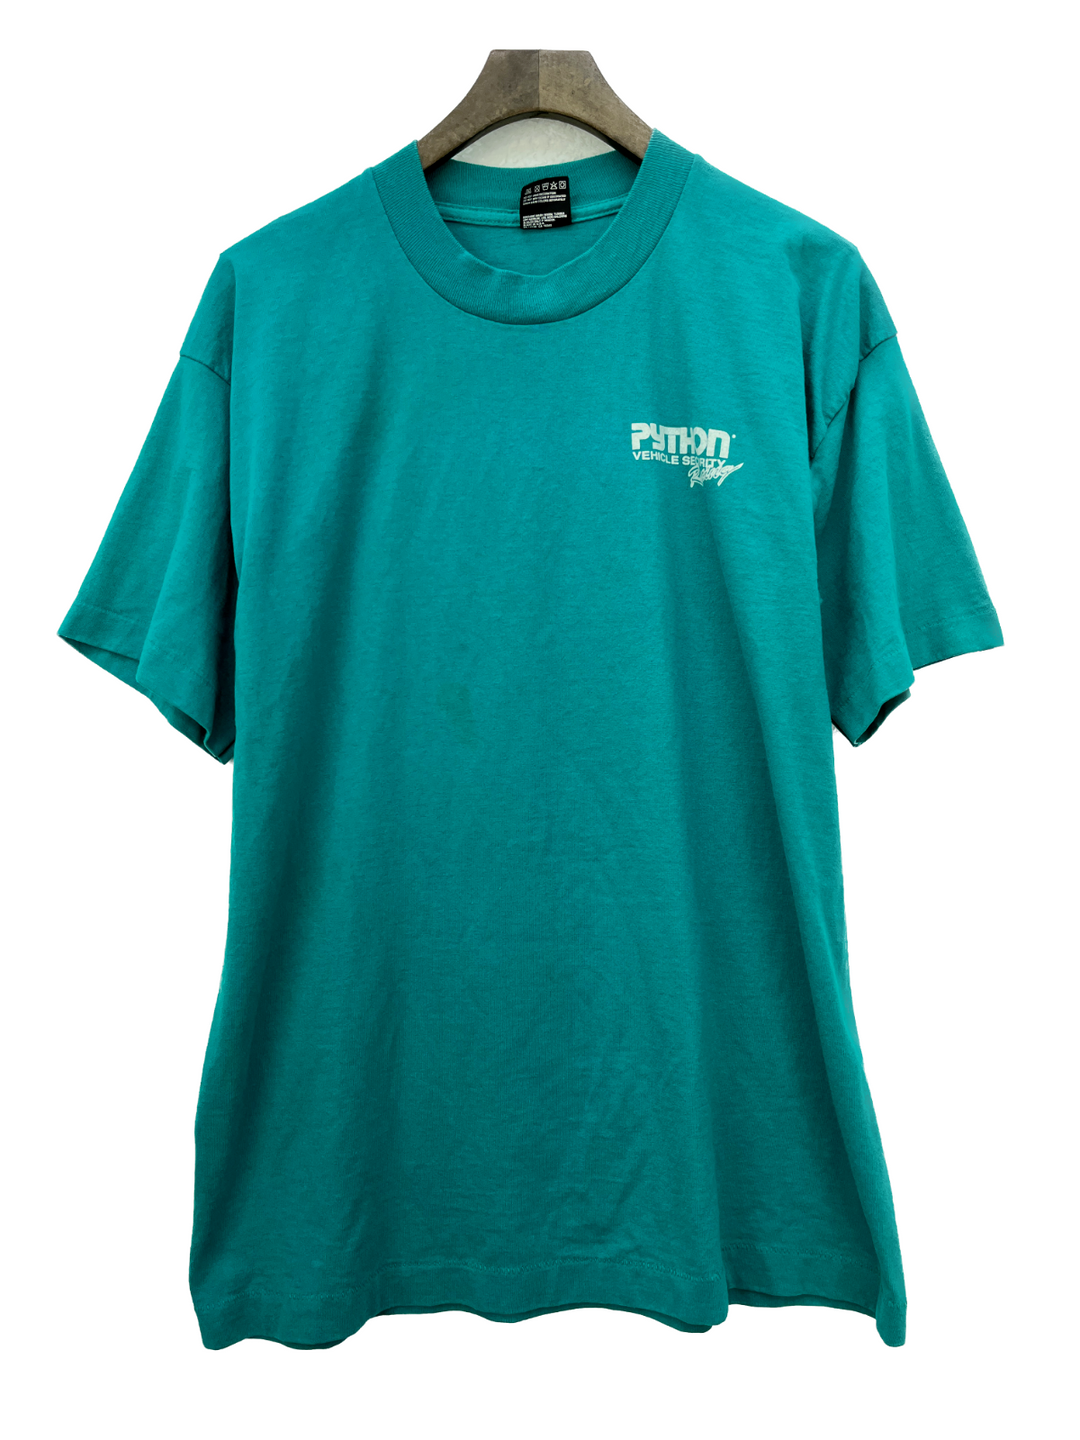 Python Vehicle Security Racing Vintage T-shirt Size L Teal Green Single Stitch